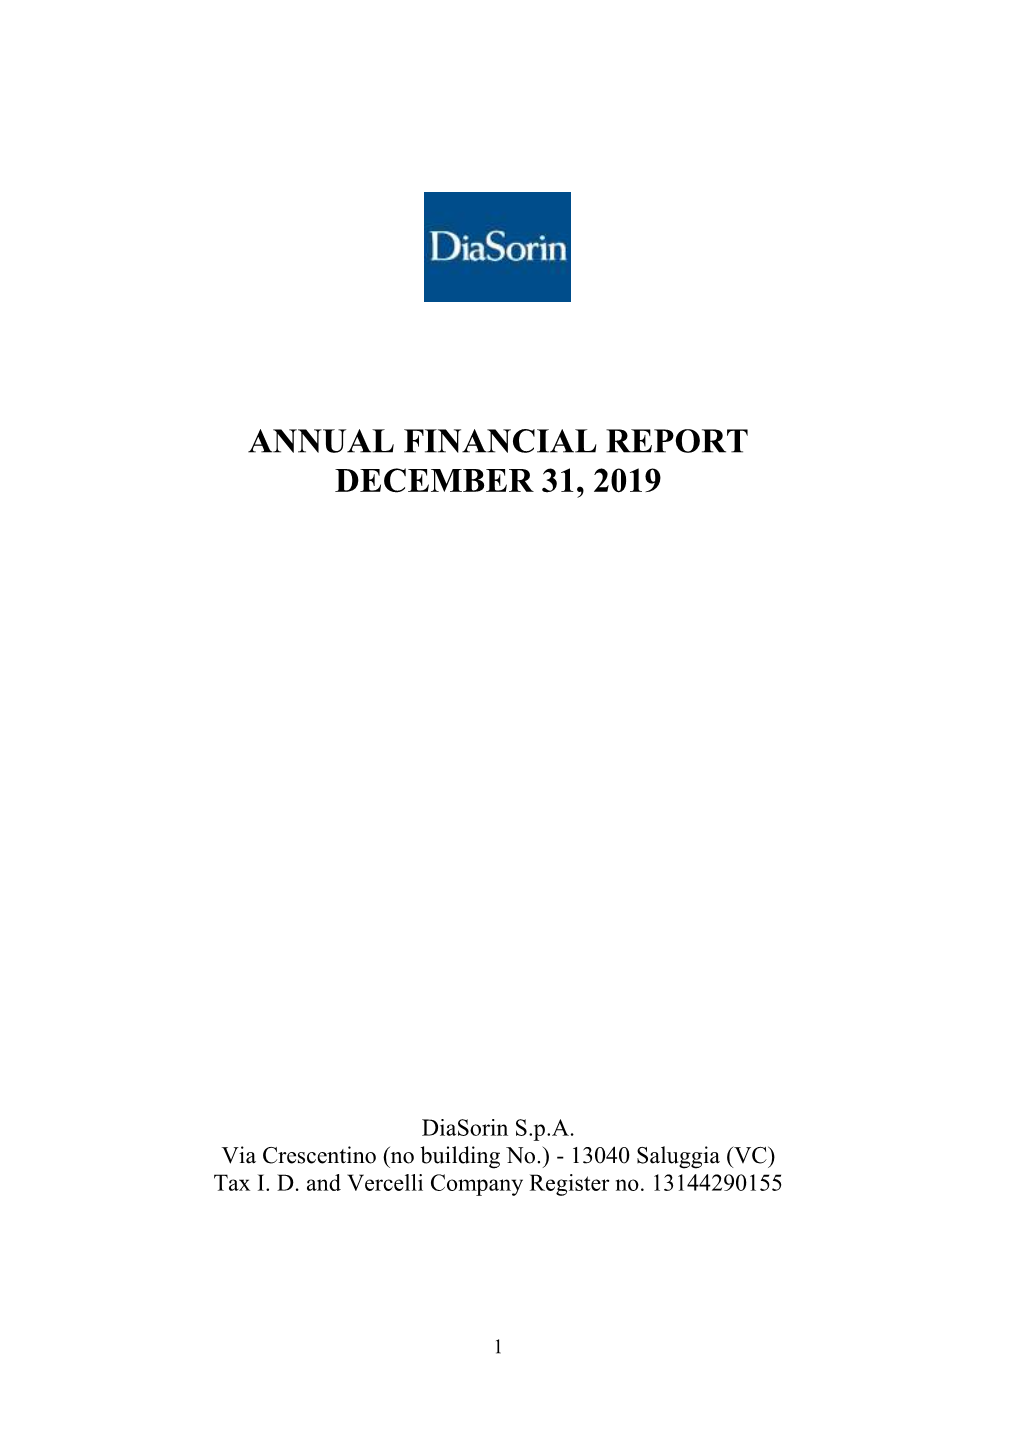 Annual Financial Report December 31, 2019